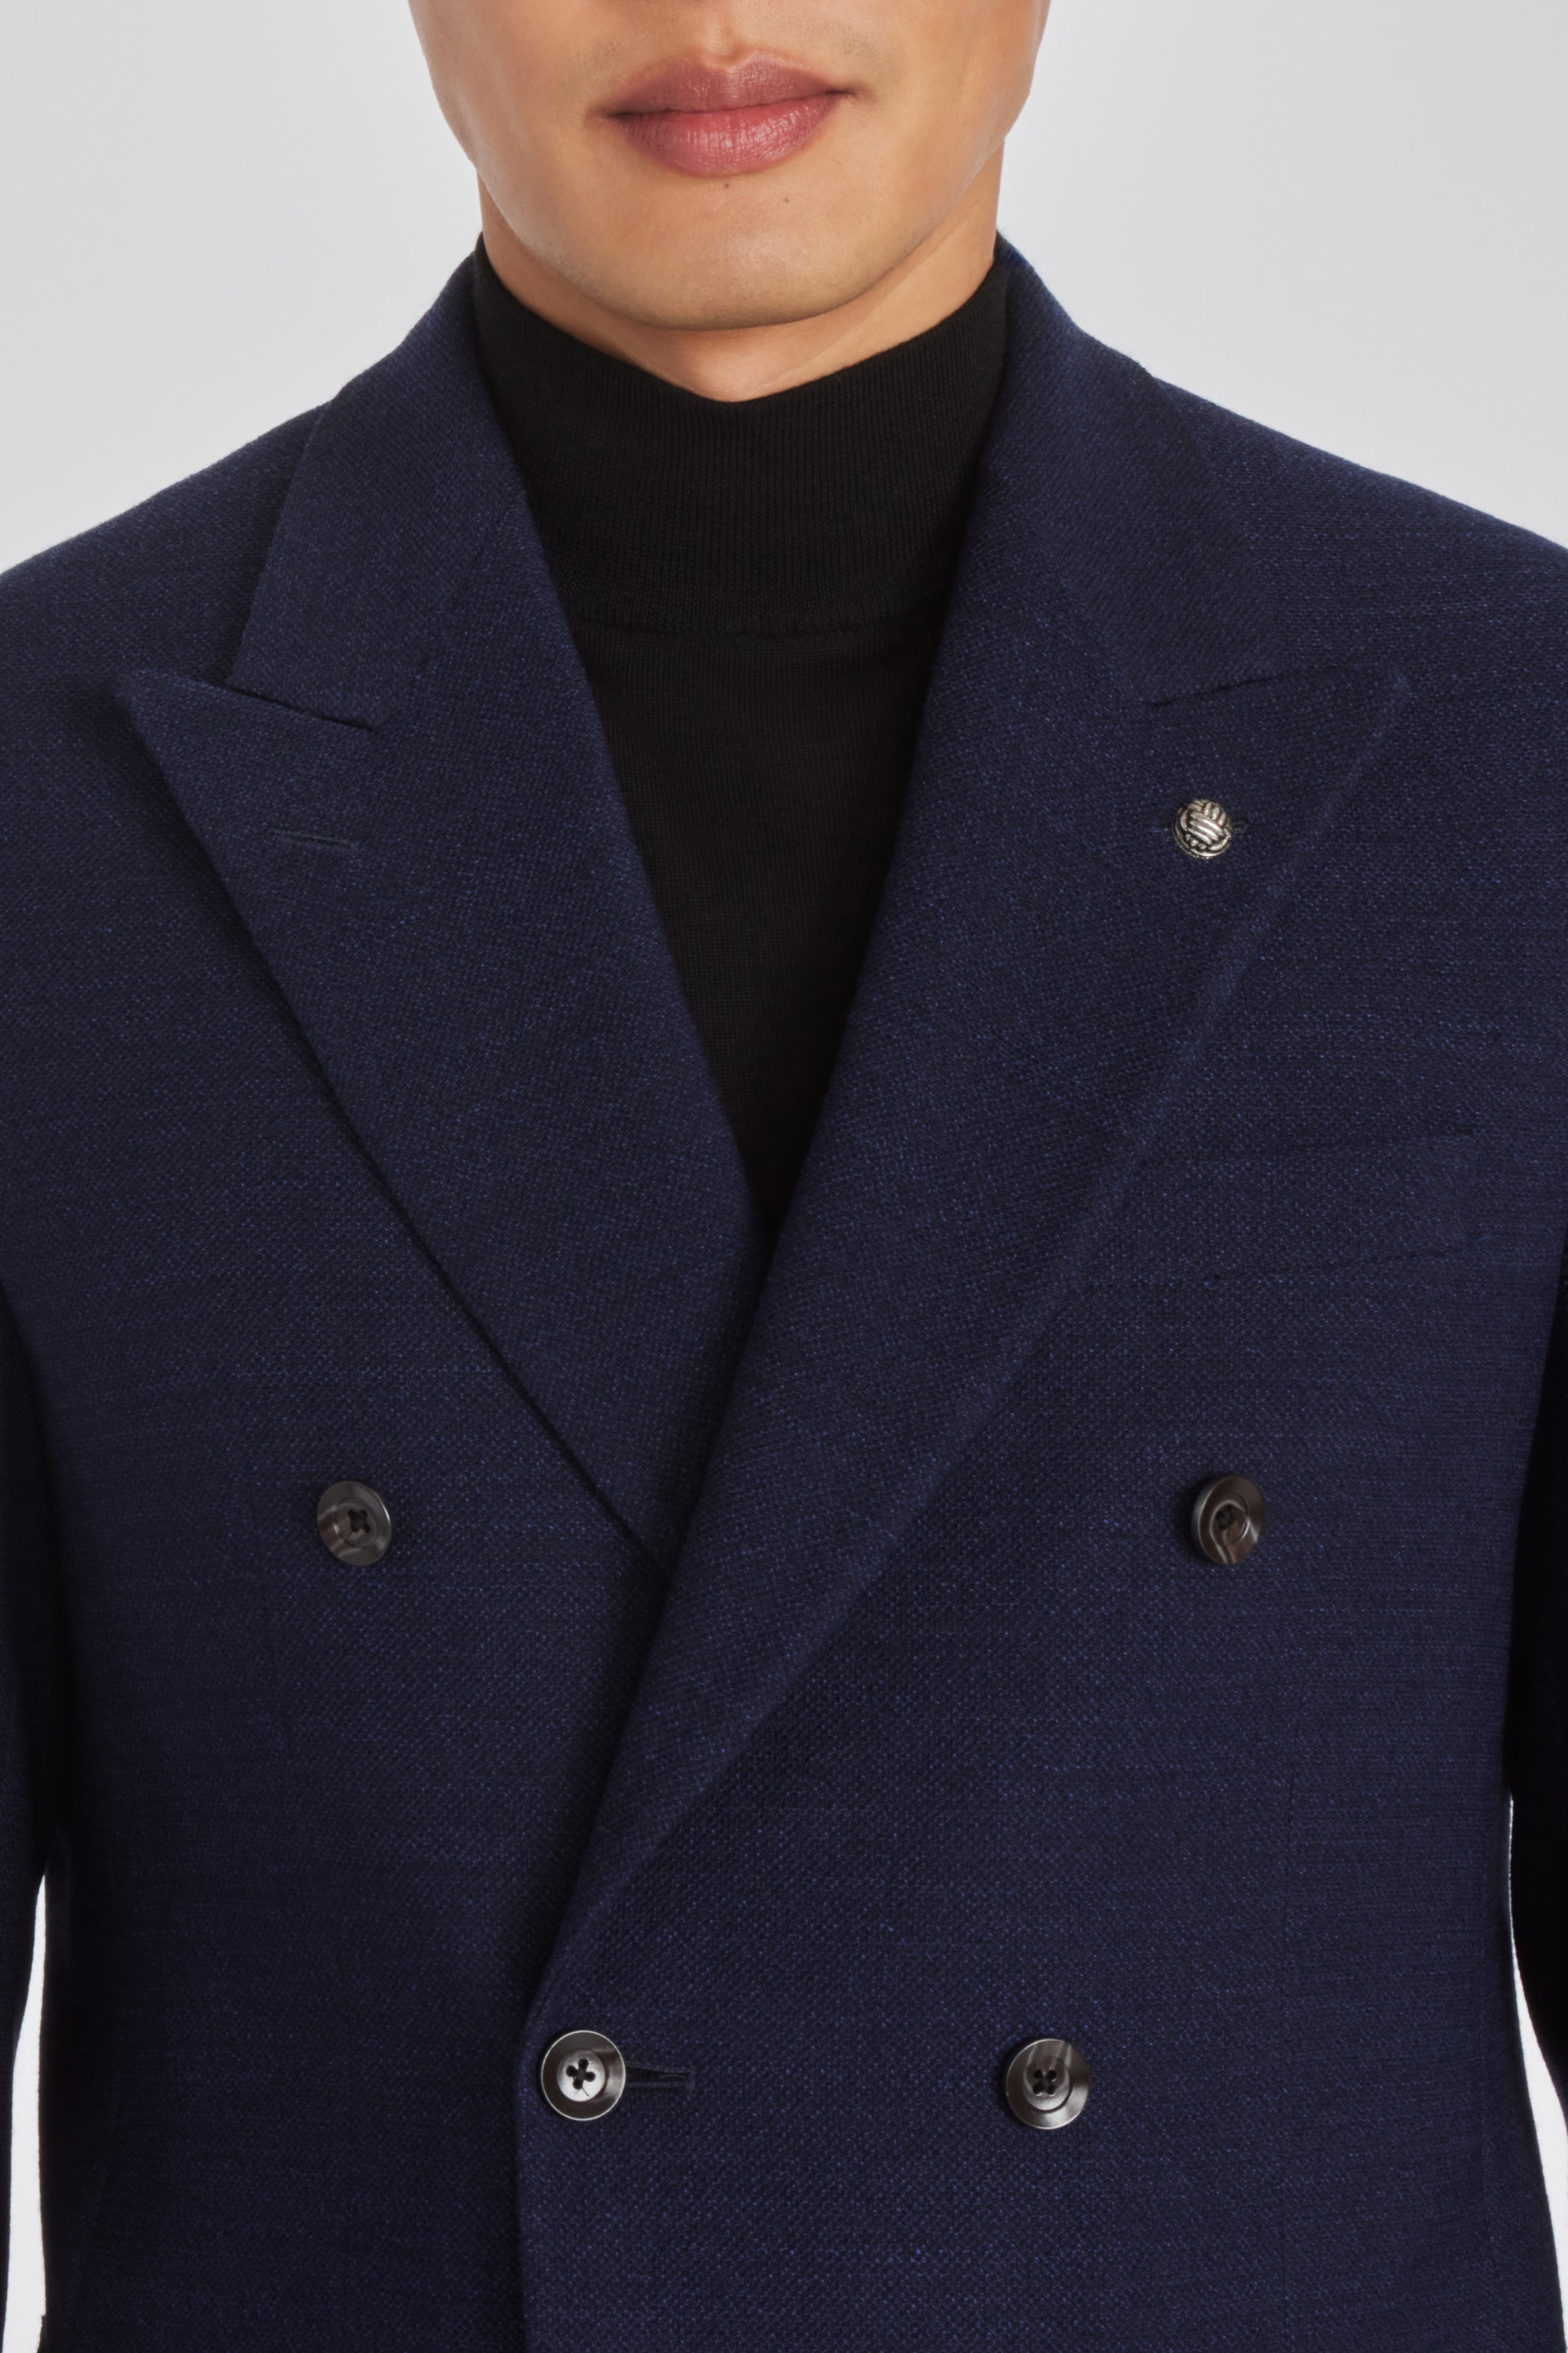 Alt view 1 Hill Solid Wool and Lycra Blazer in Navy